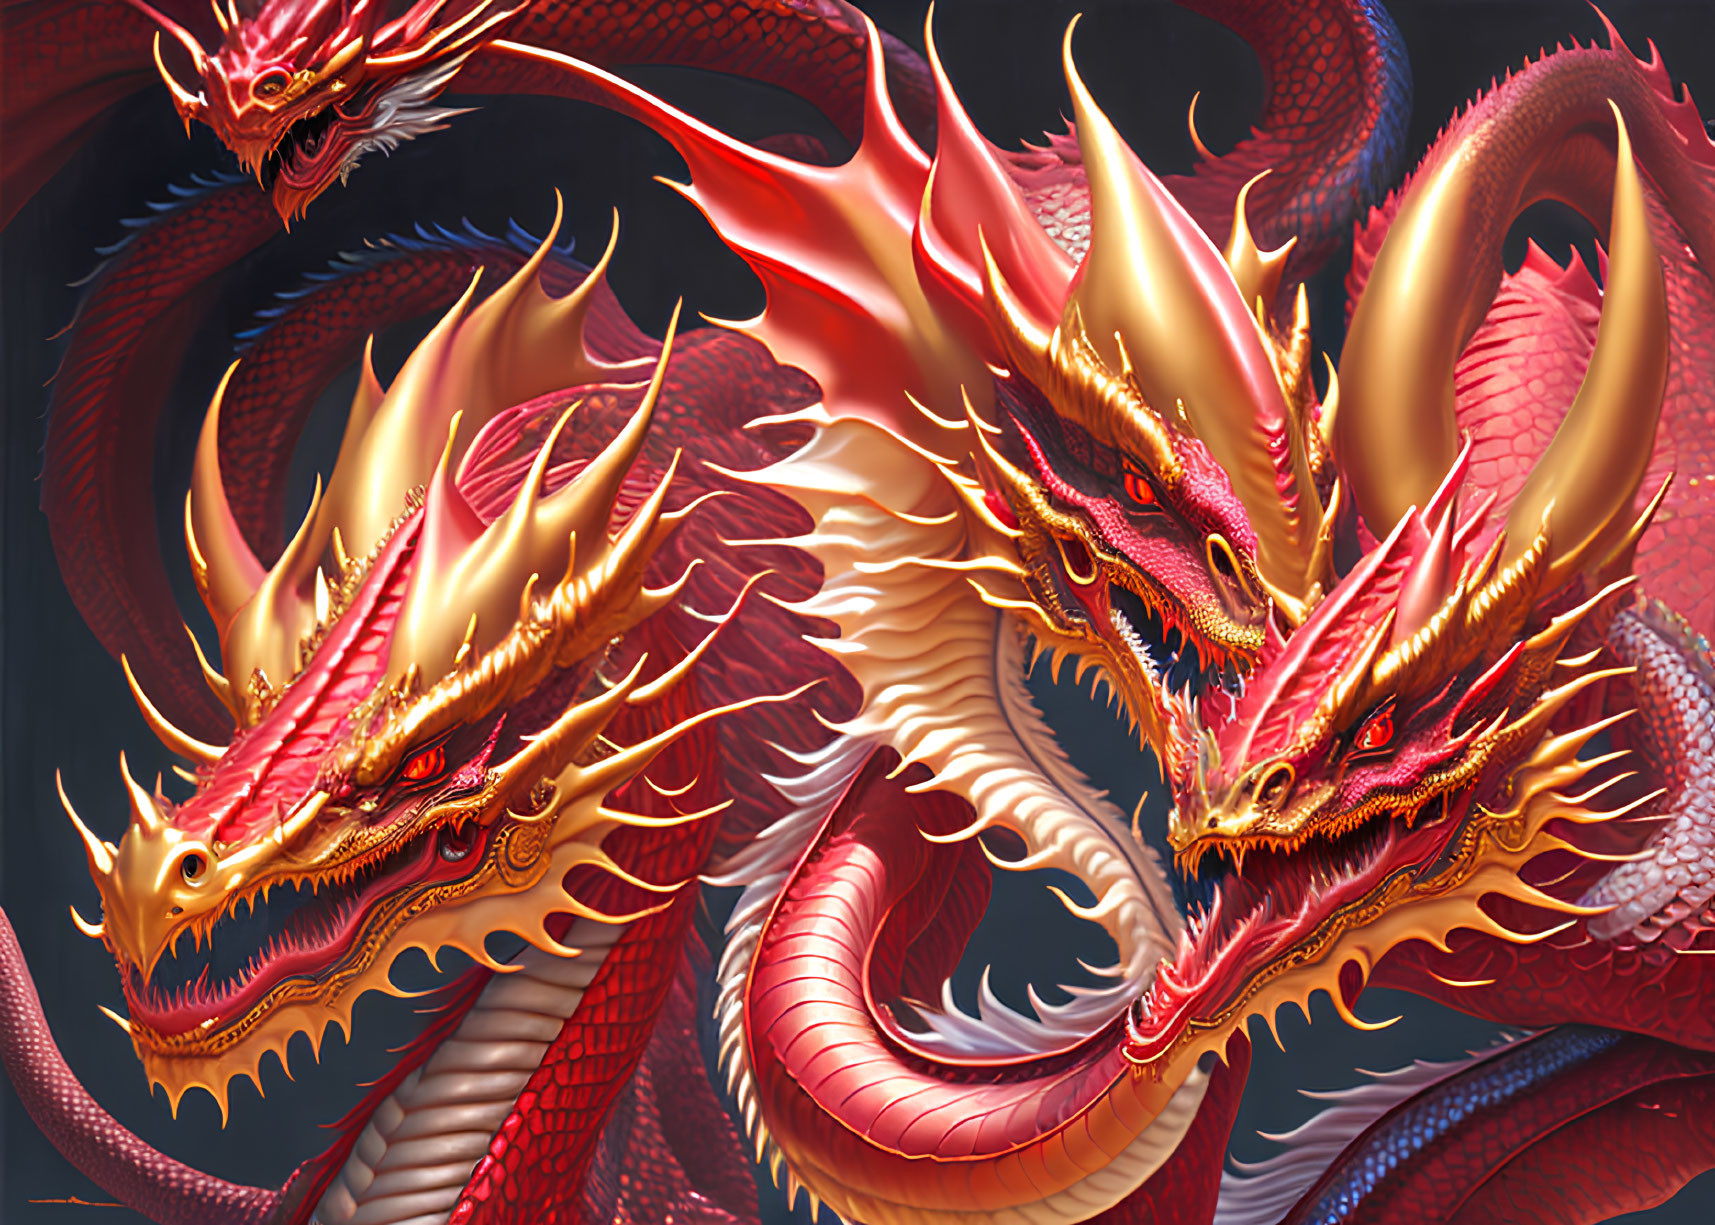 Vibrant red dragons with golden accents and intricate scales